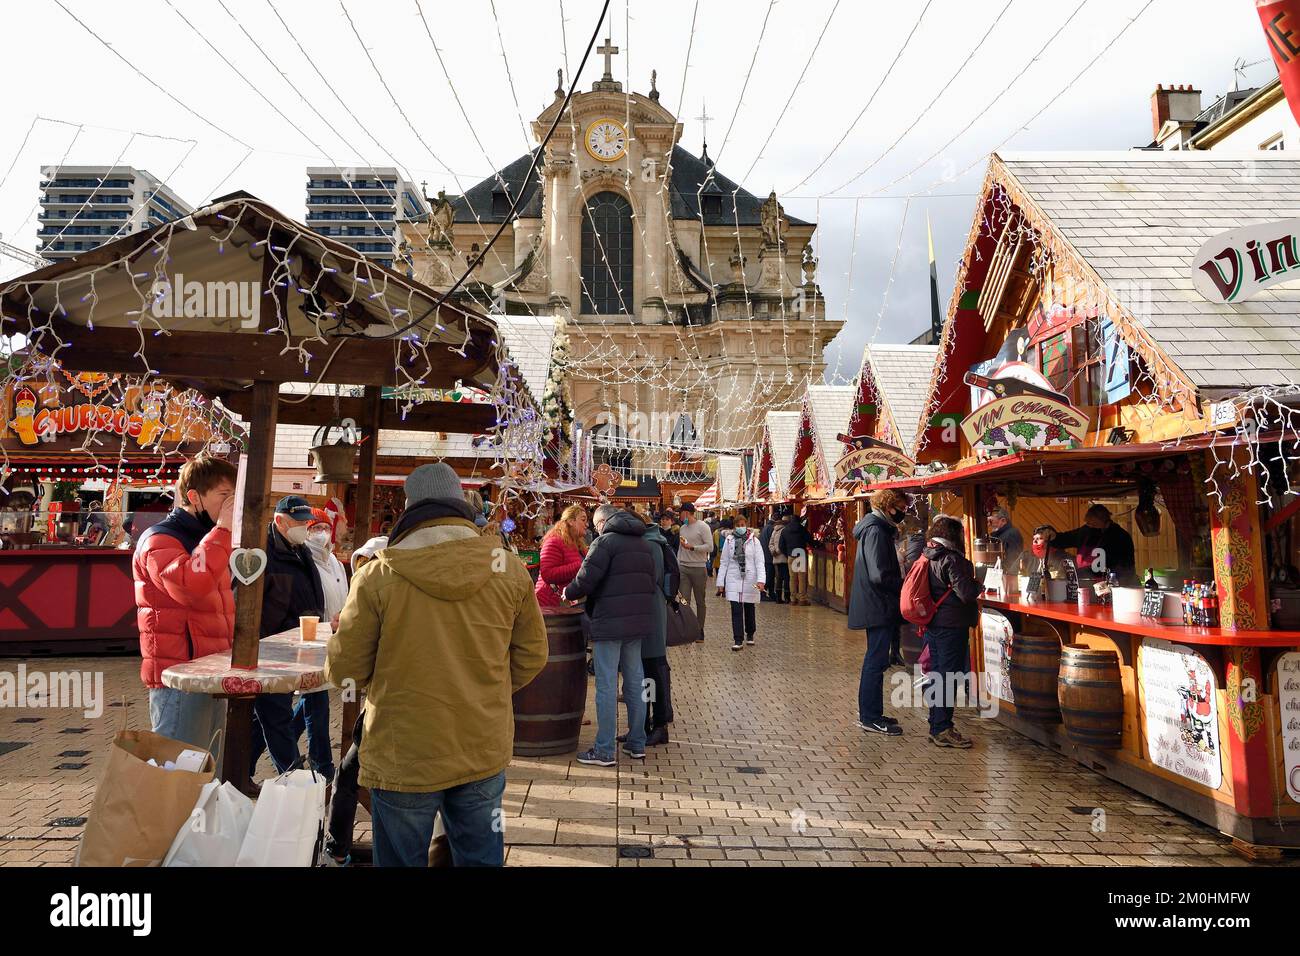 France, Meurthe-et-Moselle, Nancy, Saint-Nicolas and Christmas market on Place Charles-III, stalls selling mulled wine and food Stock Photo